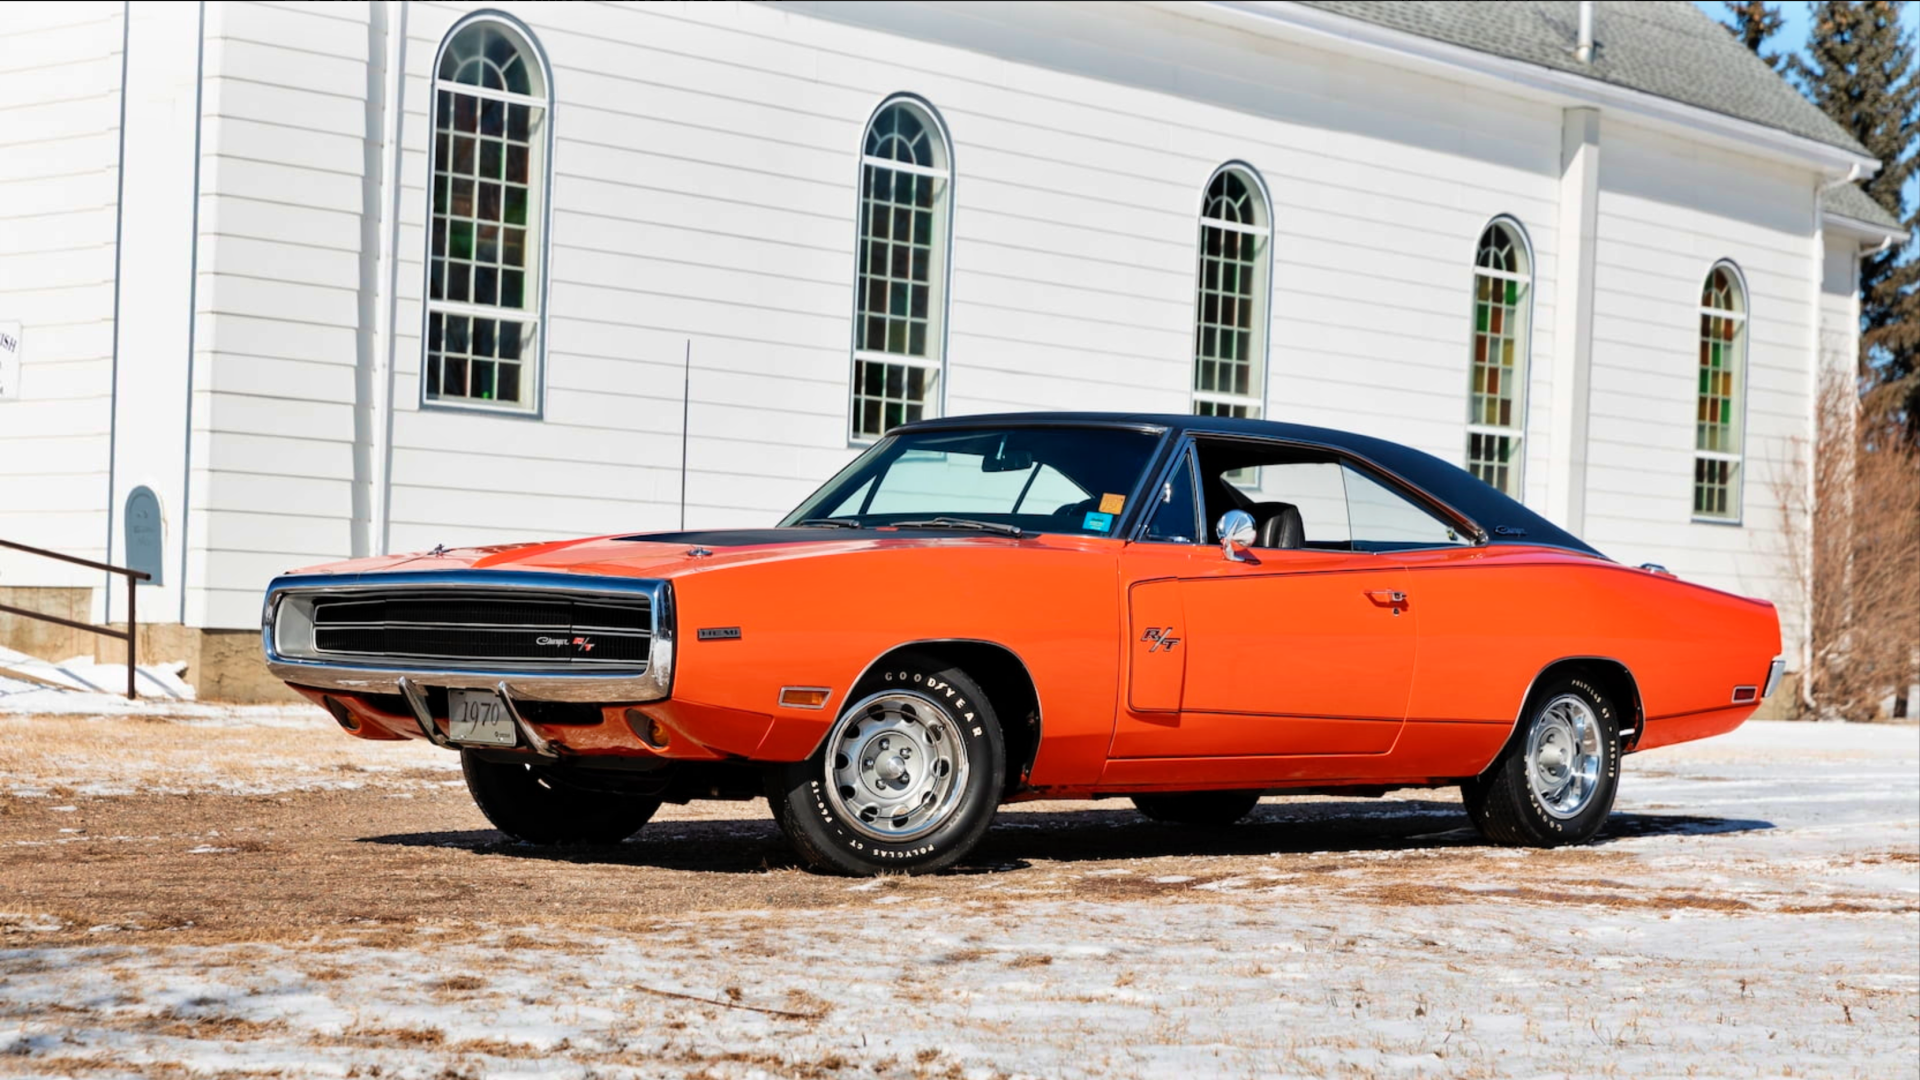 1970 Dodge Charger: Performance, Price, And Photos